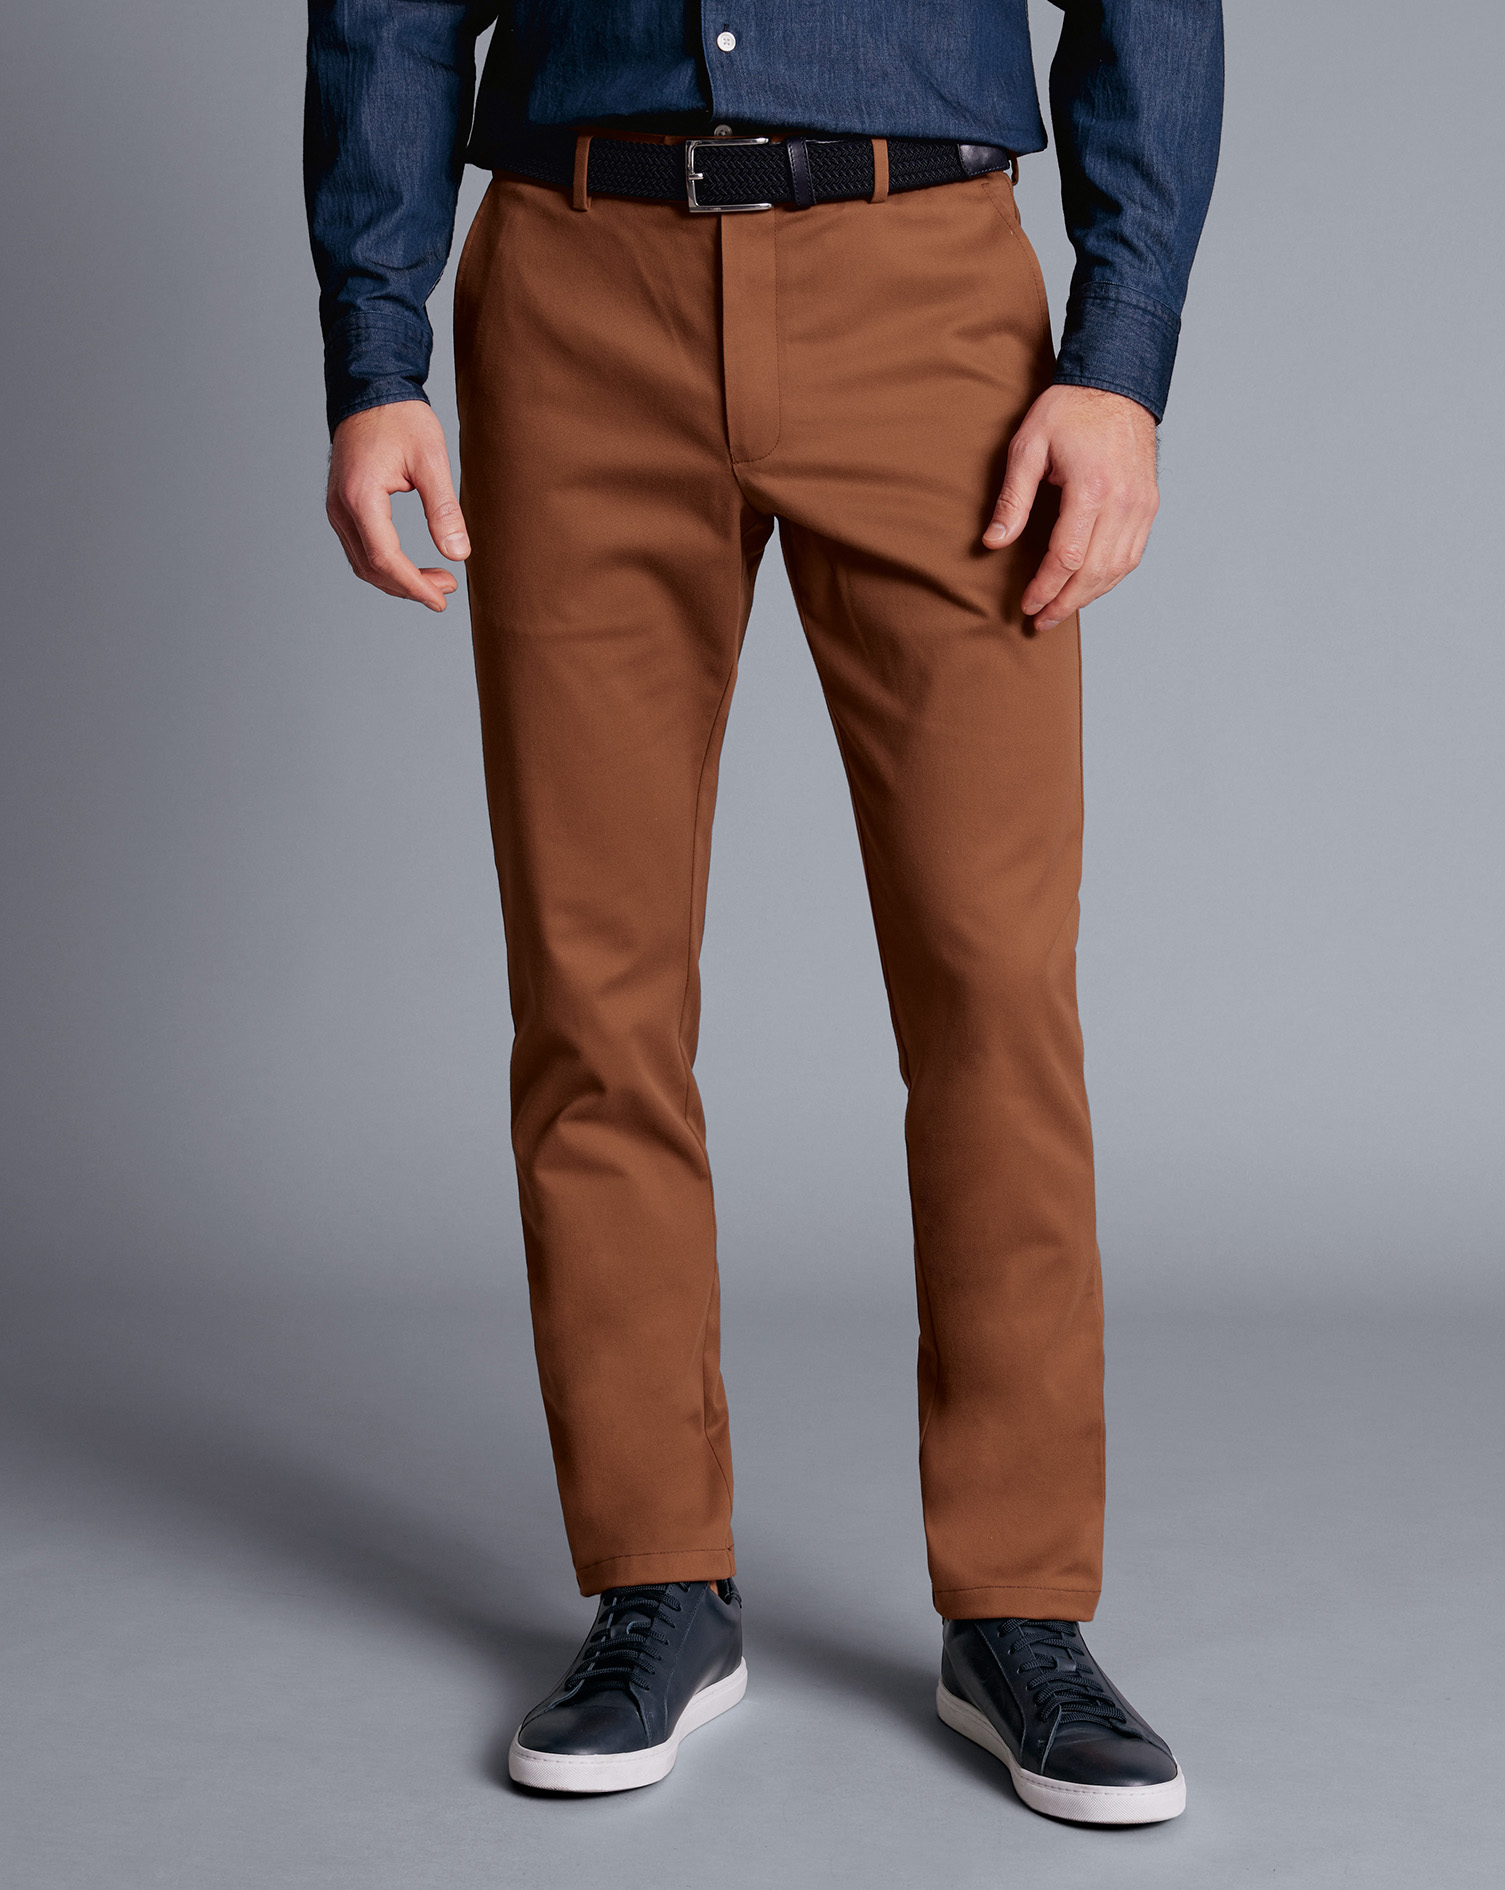 Men's Charles Tyrwhitt Ultimate Non-Iron Chino Pants - Toffee Brown Size W42 L32 Cotton
